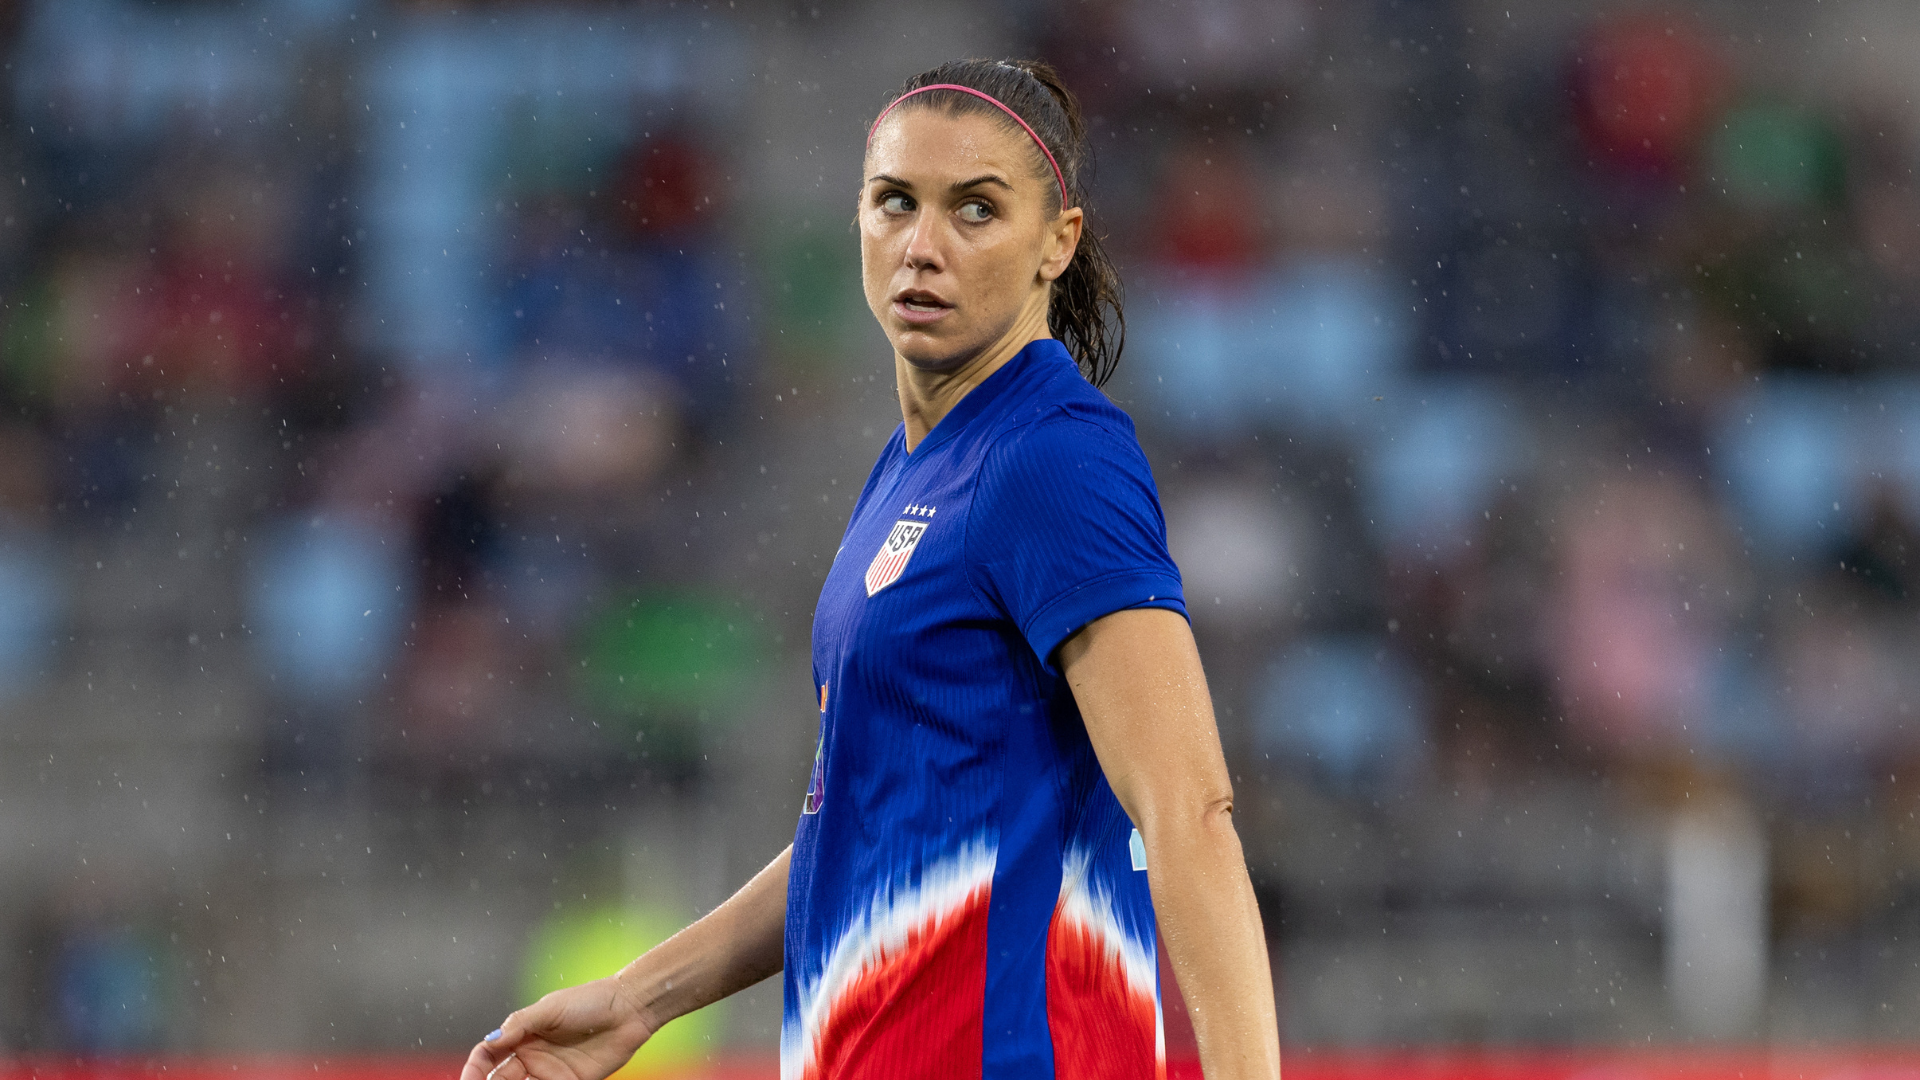 Morgan left out of Team USA squad